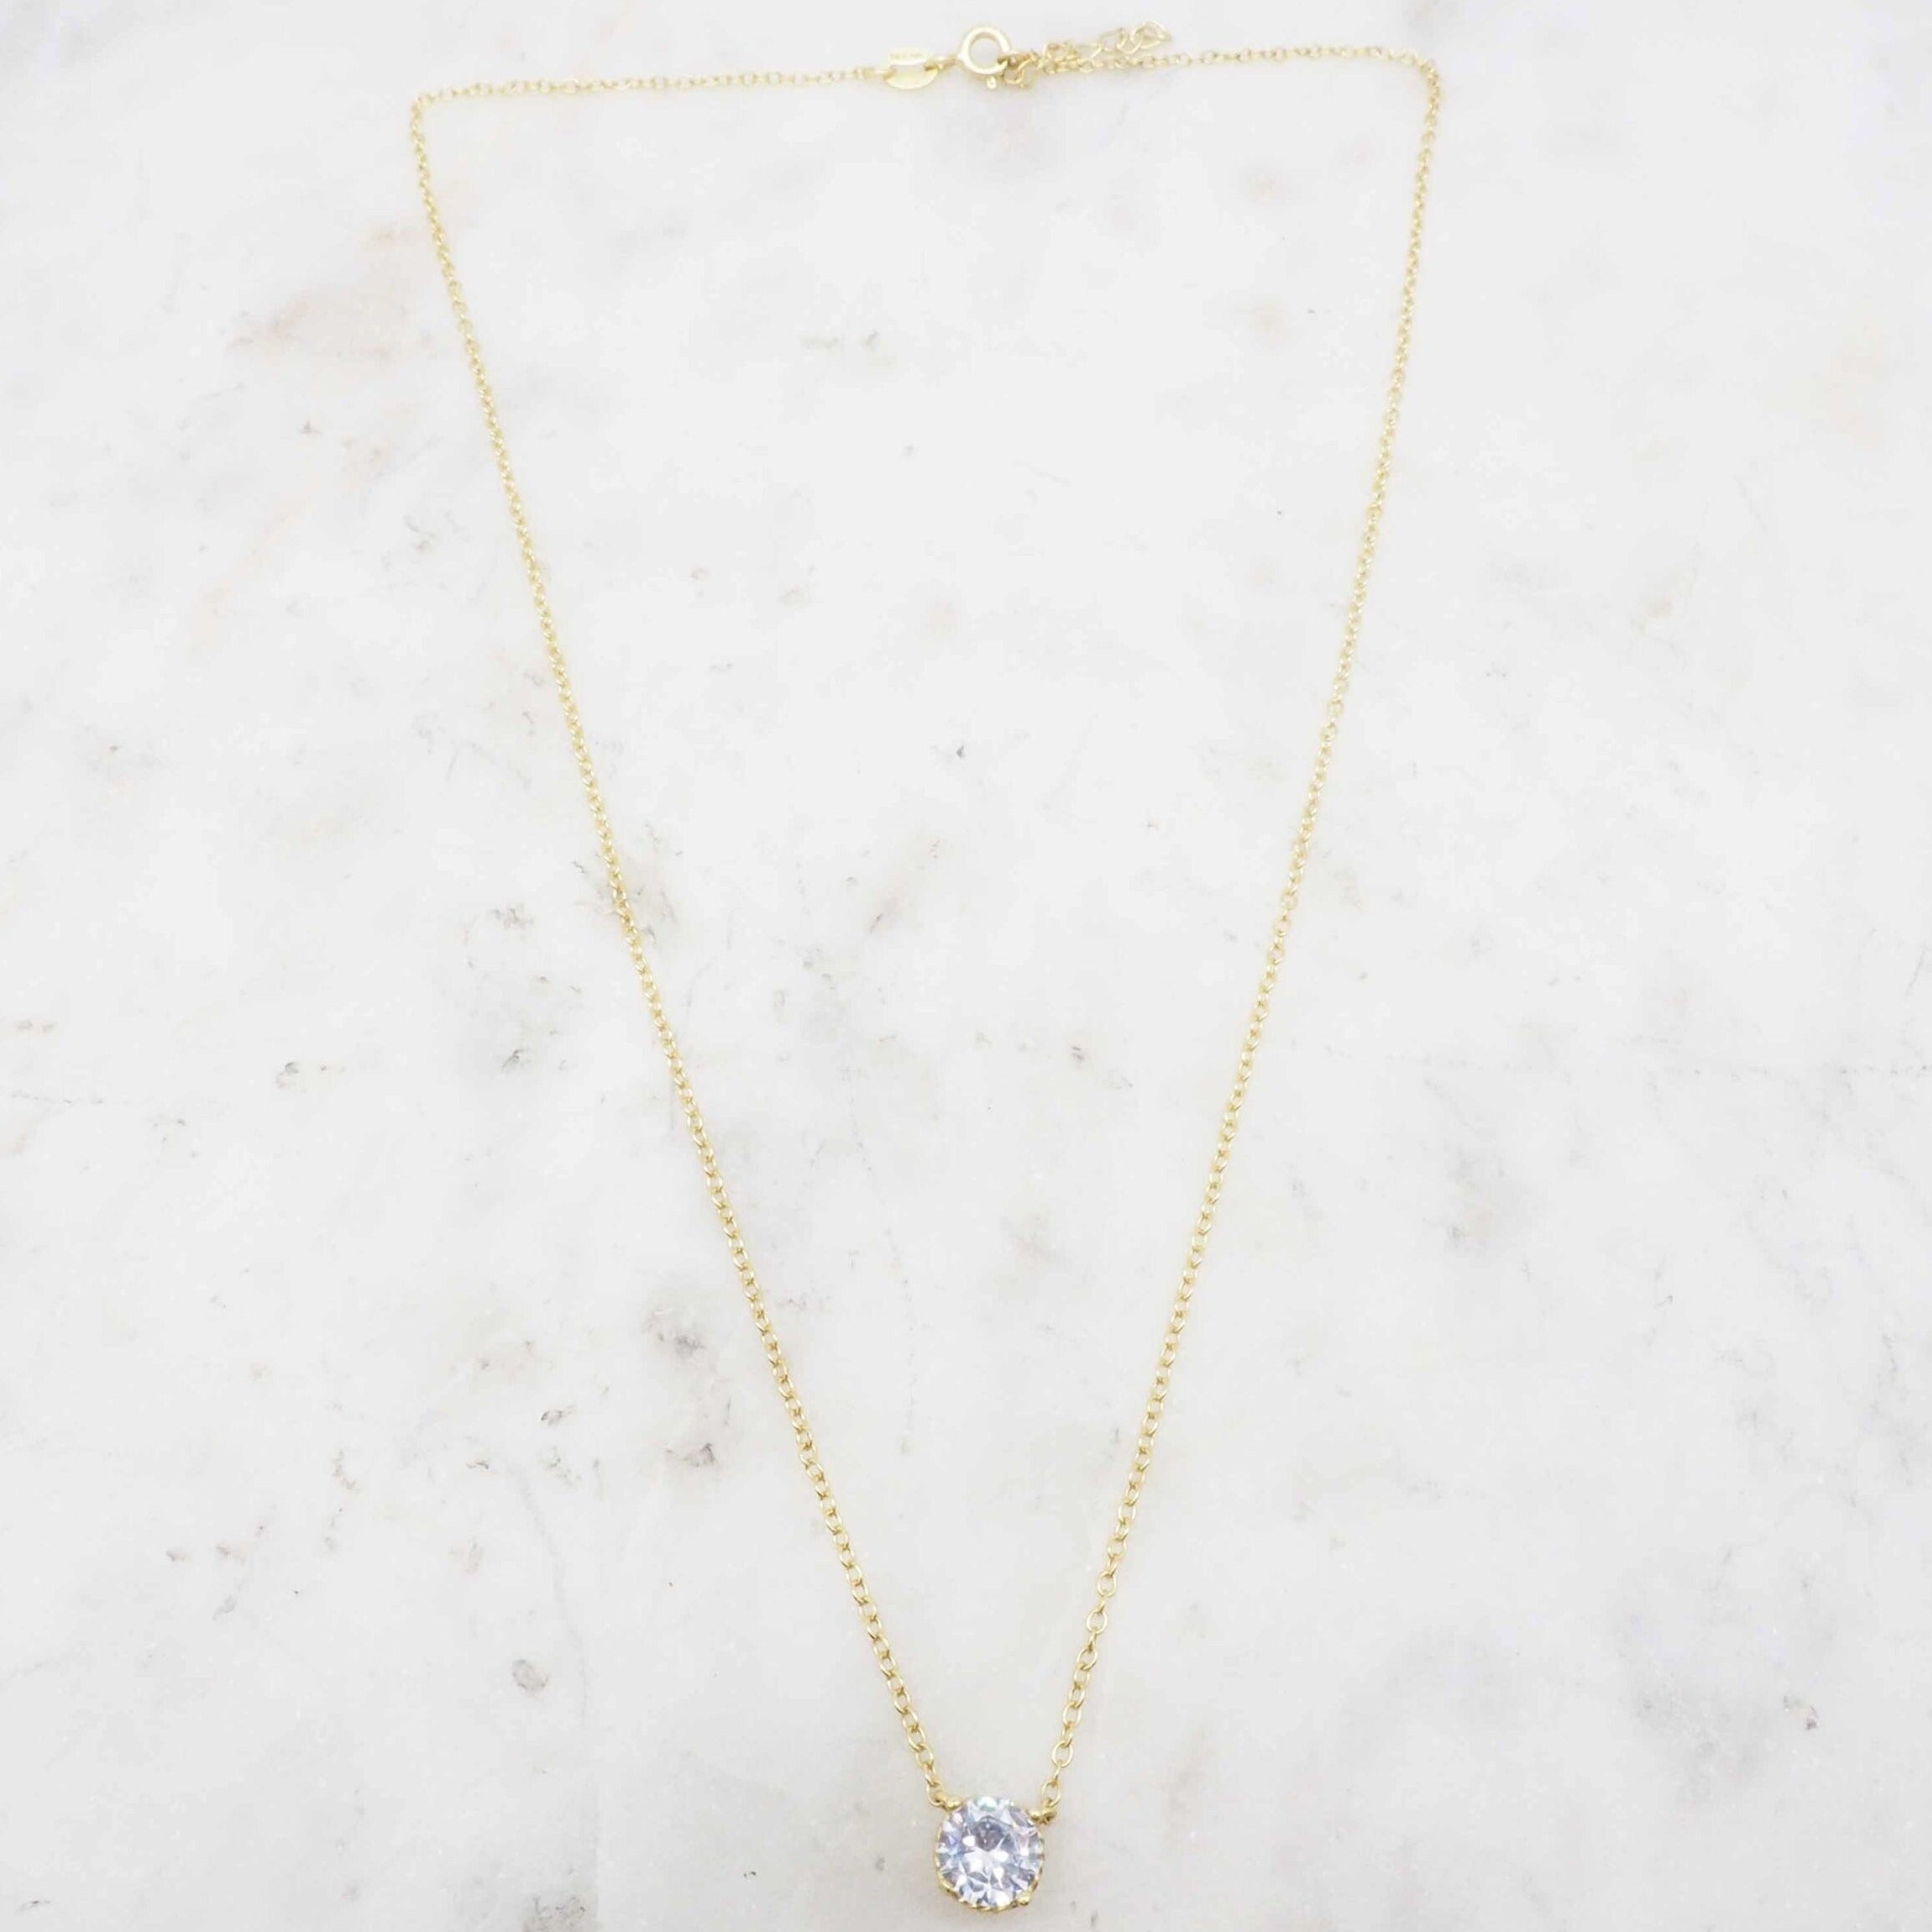 The Golden Solitaire - Necklace